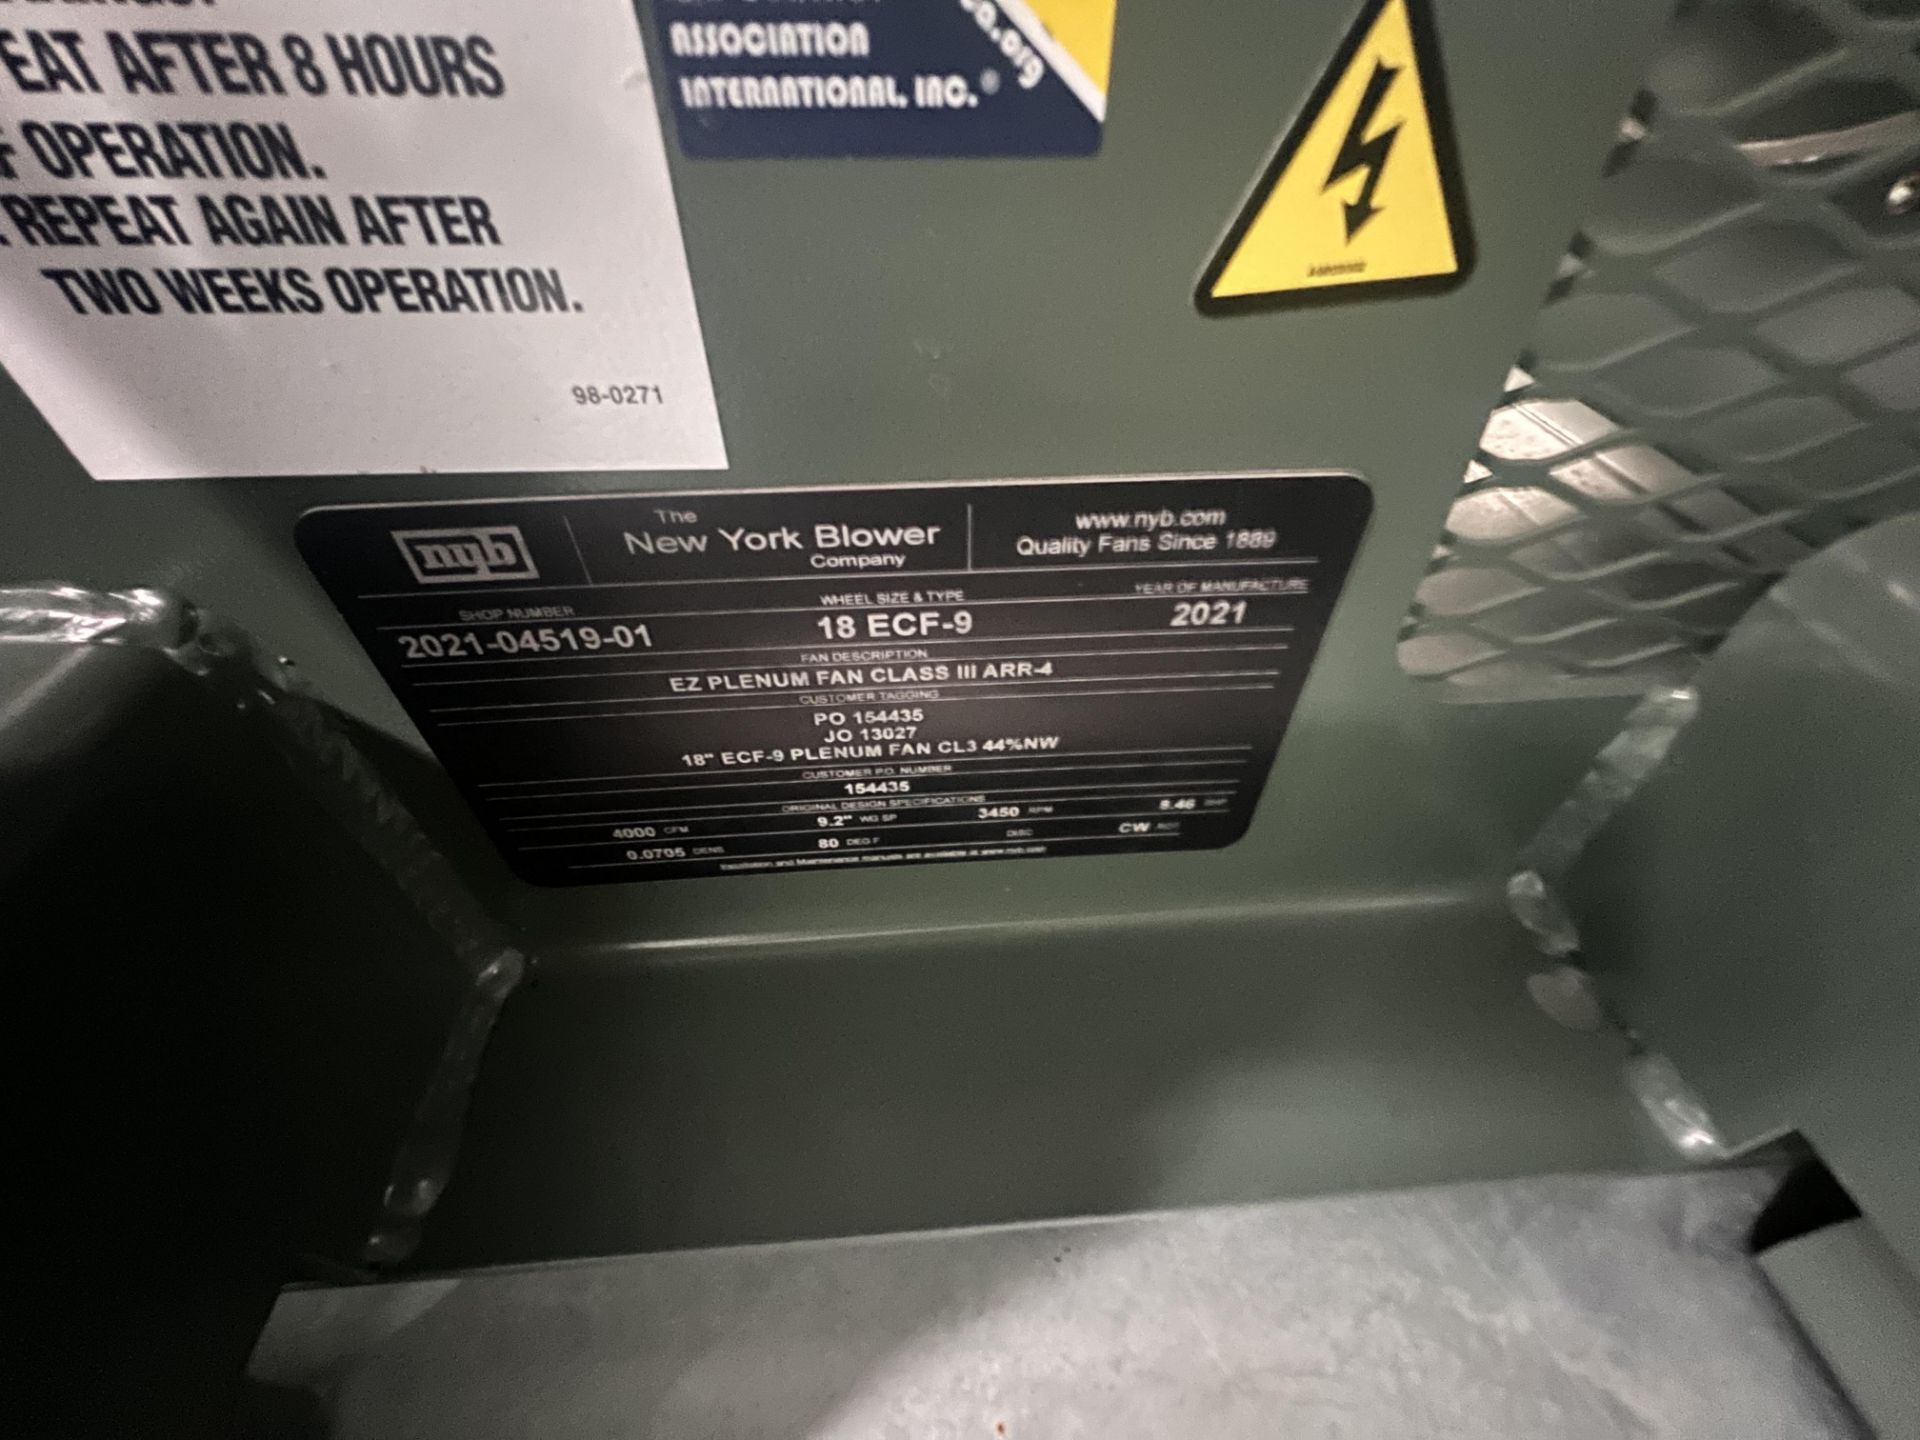 CLIMATE BY DESIGN AIR HANDLING UNIT, MODEL AHU-2E, S/N024632-001-001, 460 V, PREVIOUSLY OPERATING IN - Image 12 of 20